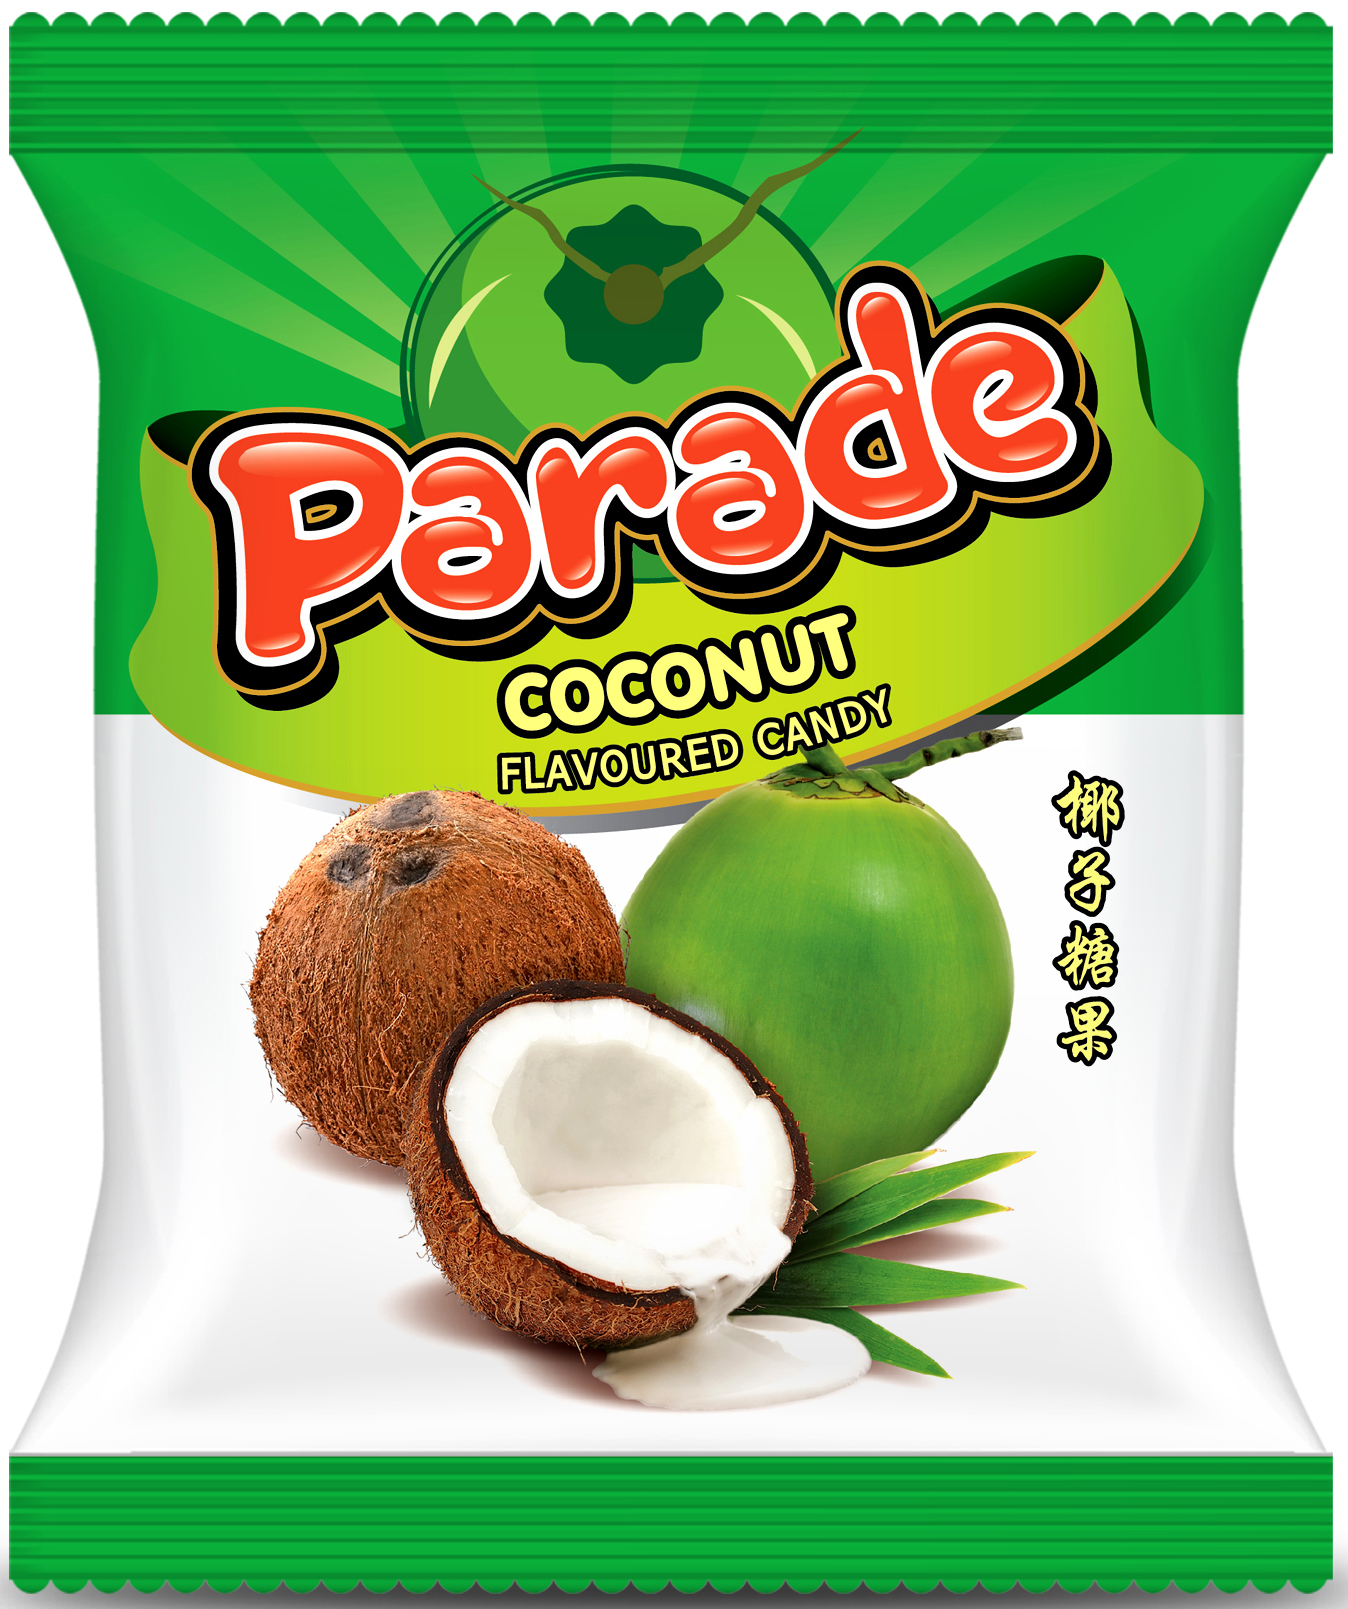 Parade Coconut Flavoured Candy